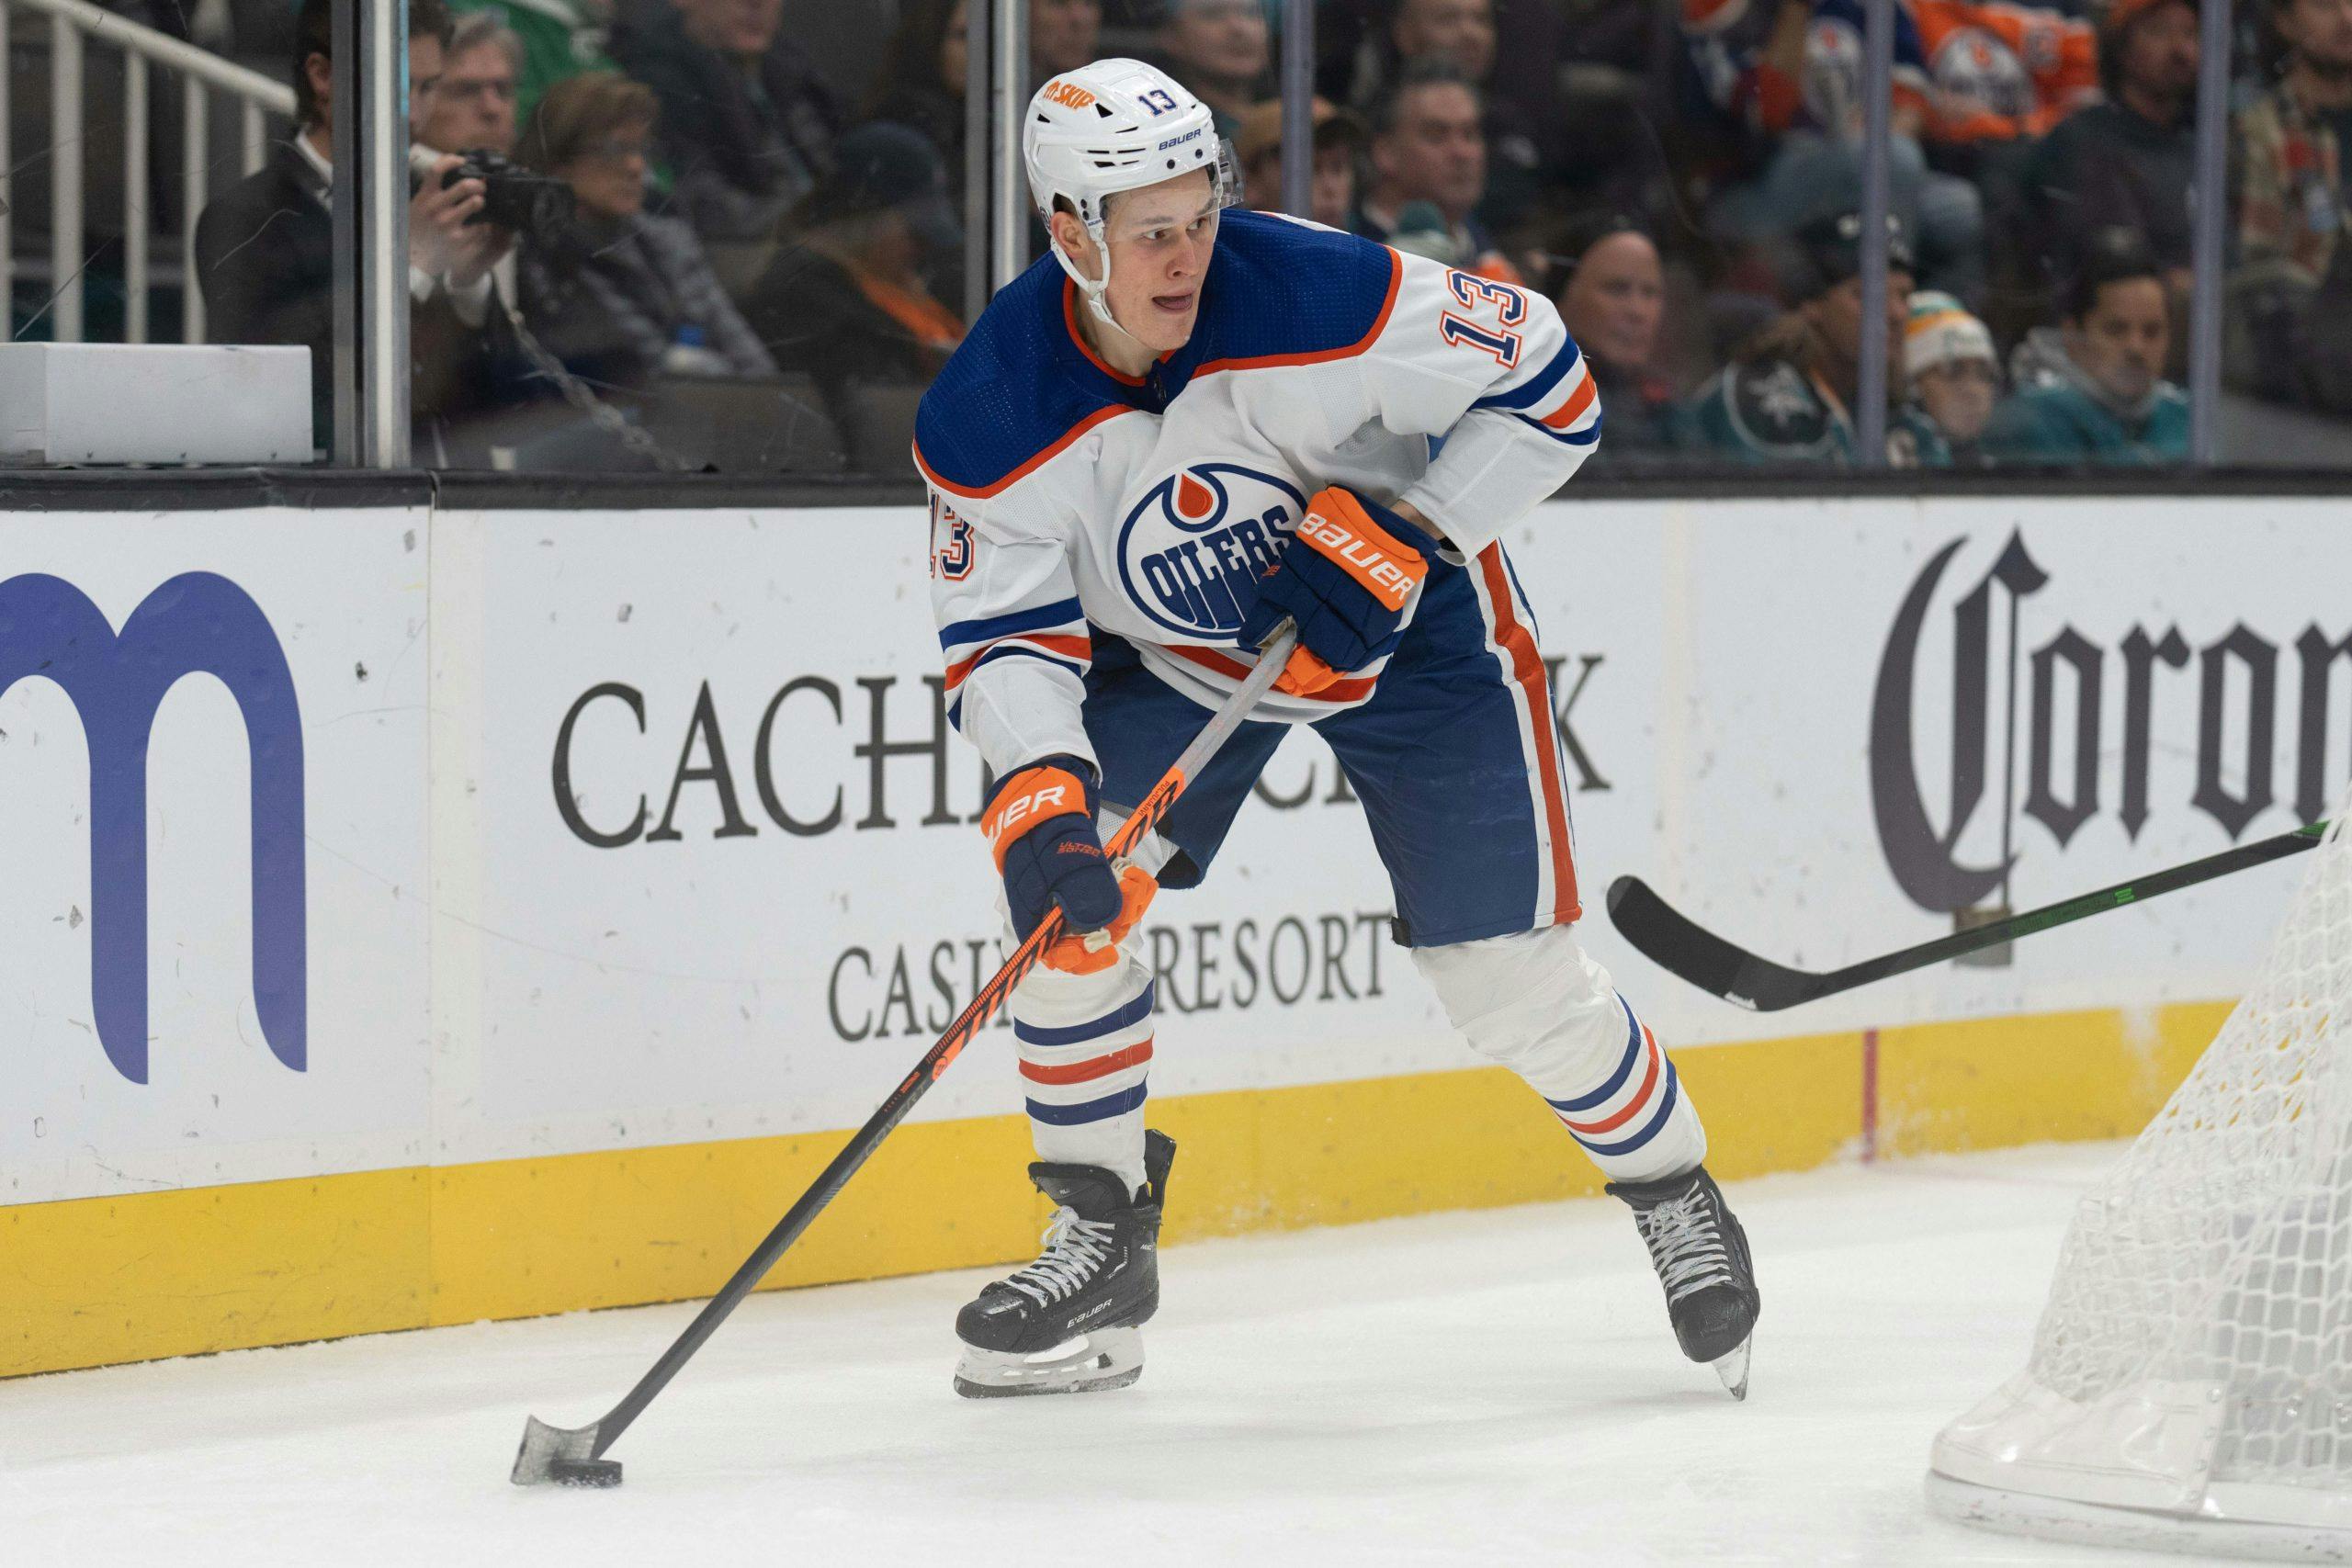 Bear looking for fresh start following Oilers' trade with Carolina  Hurricanes